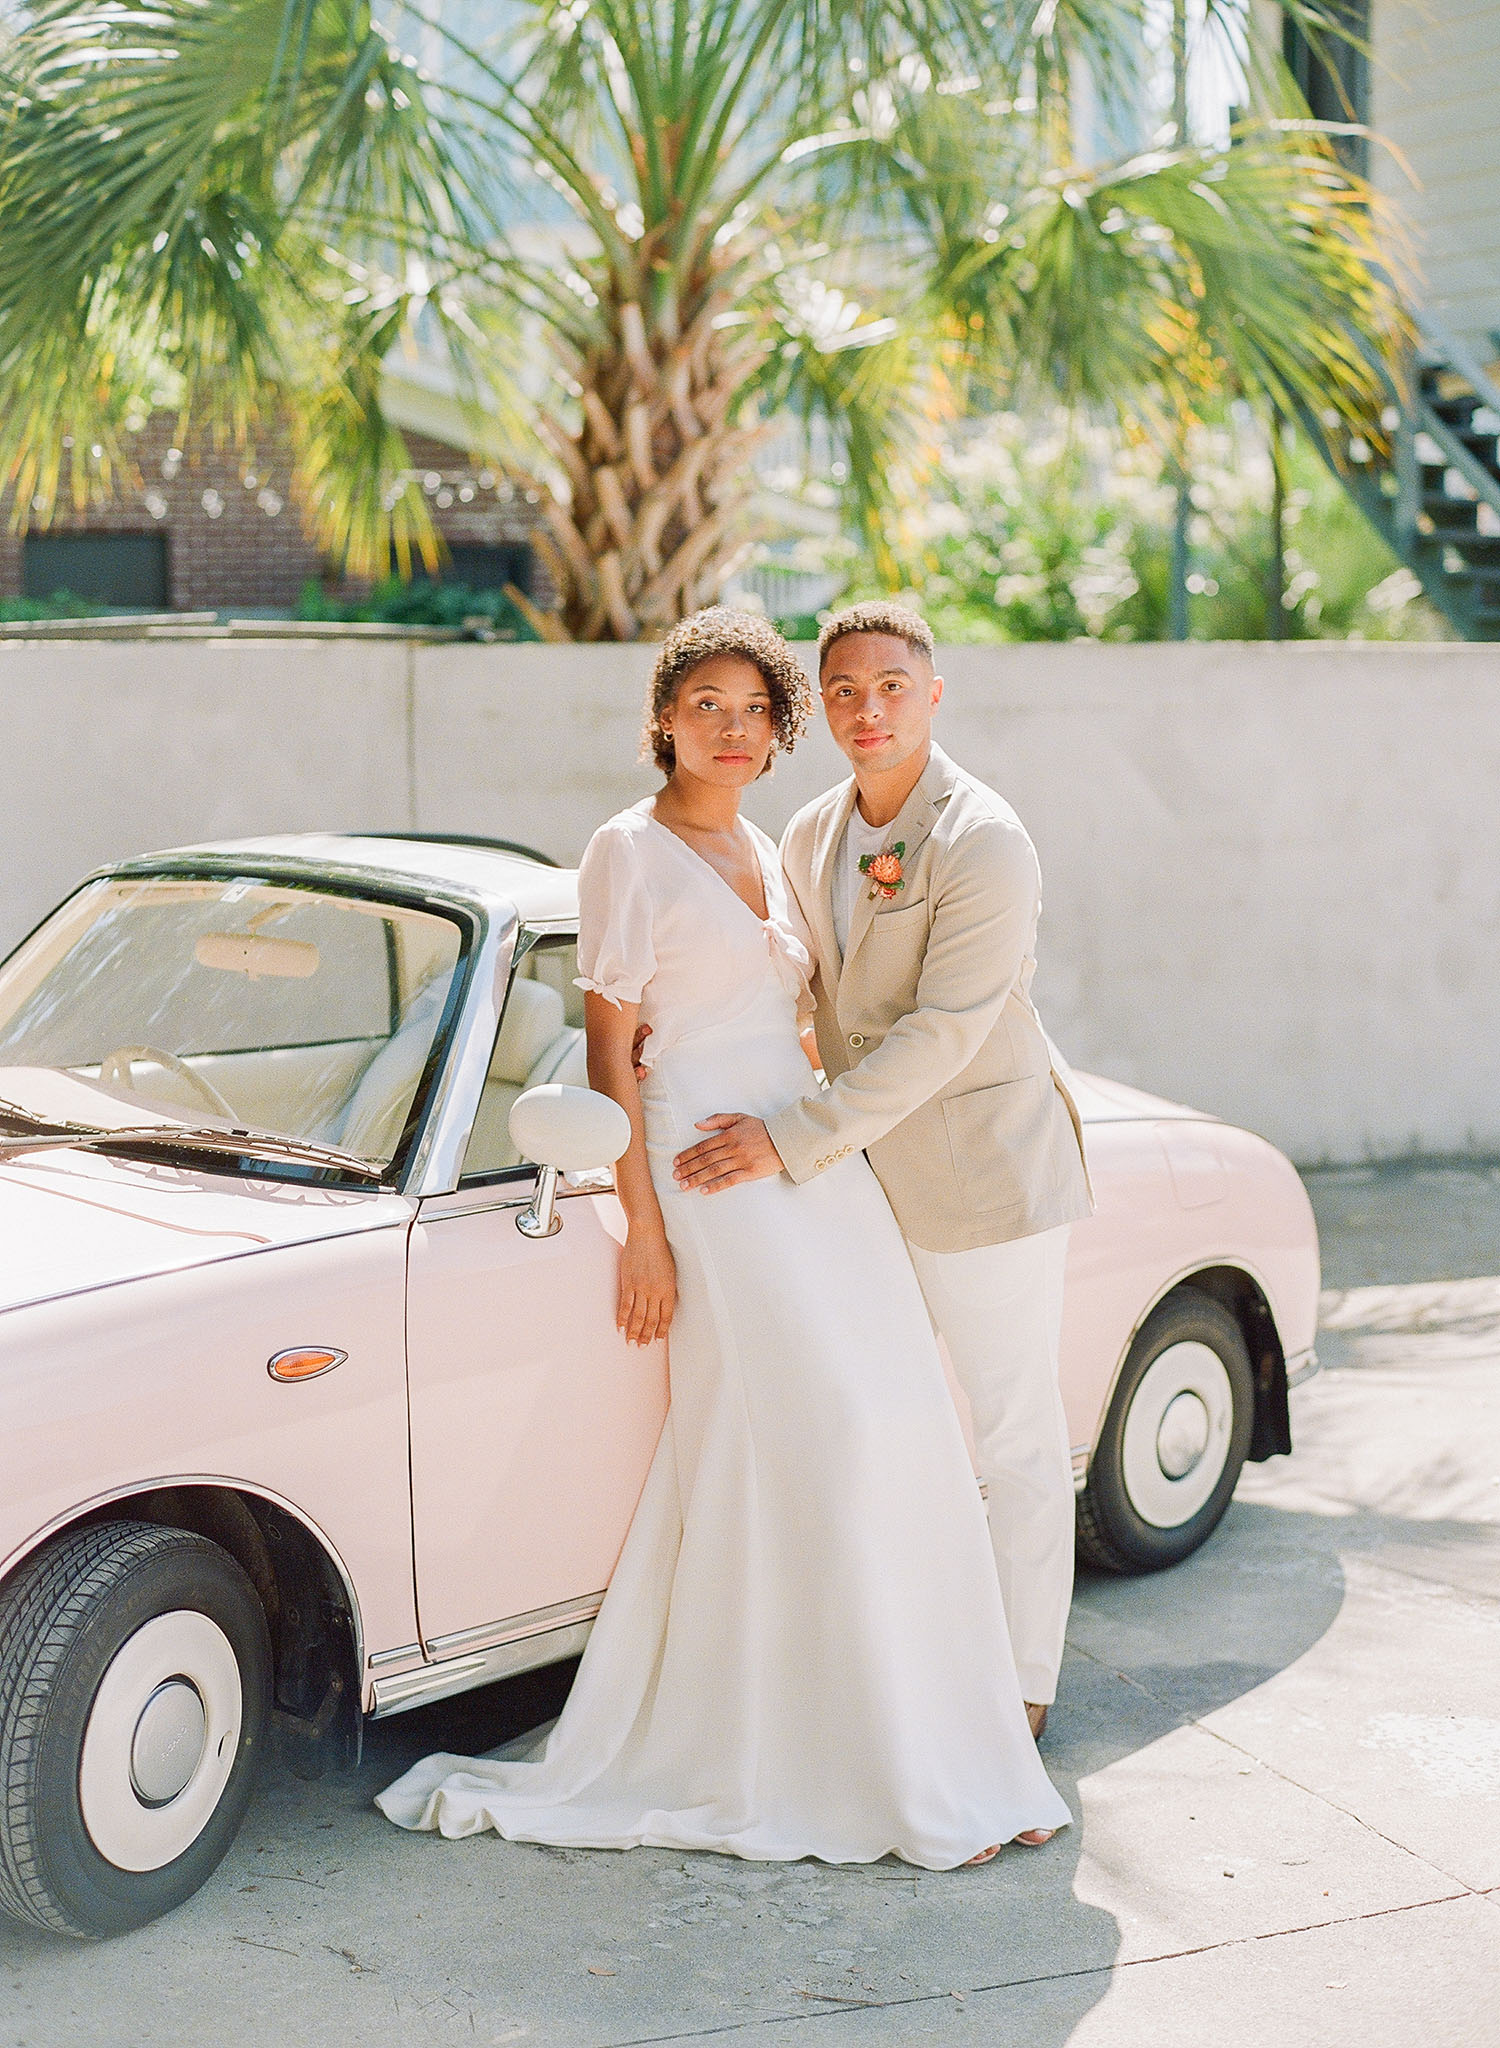 Emma Katzka crepe wedding dress with a delicate blush overlay and a tan suit jacket from M. Dumas & Sons, captured by Clay Austin and planned by Willow and Oak with fashion styling by The Edit Collective